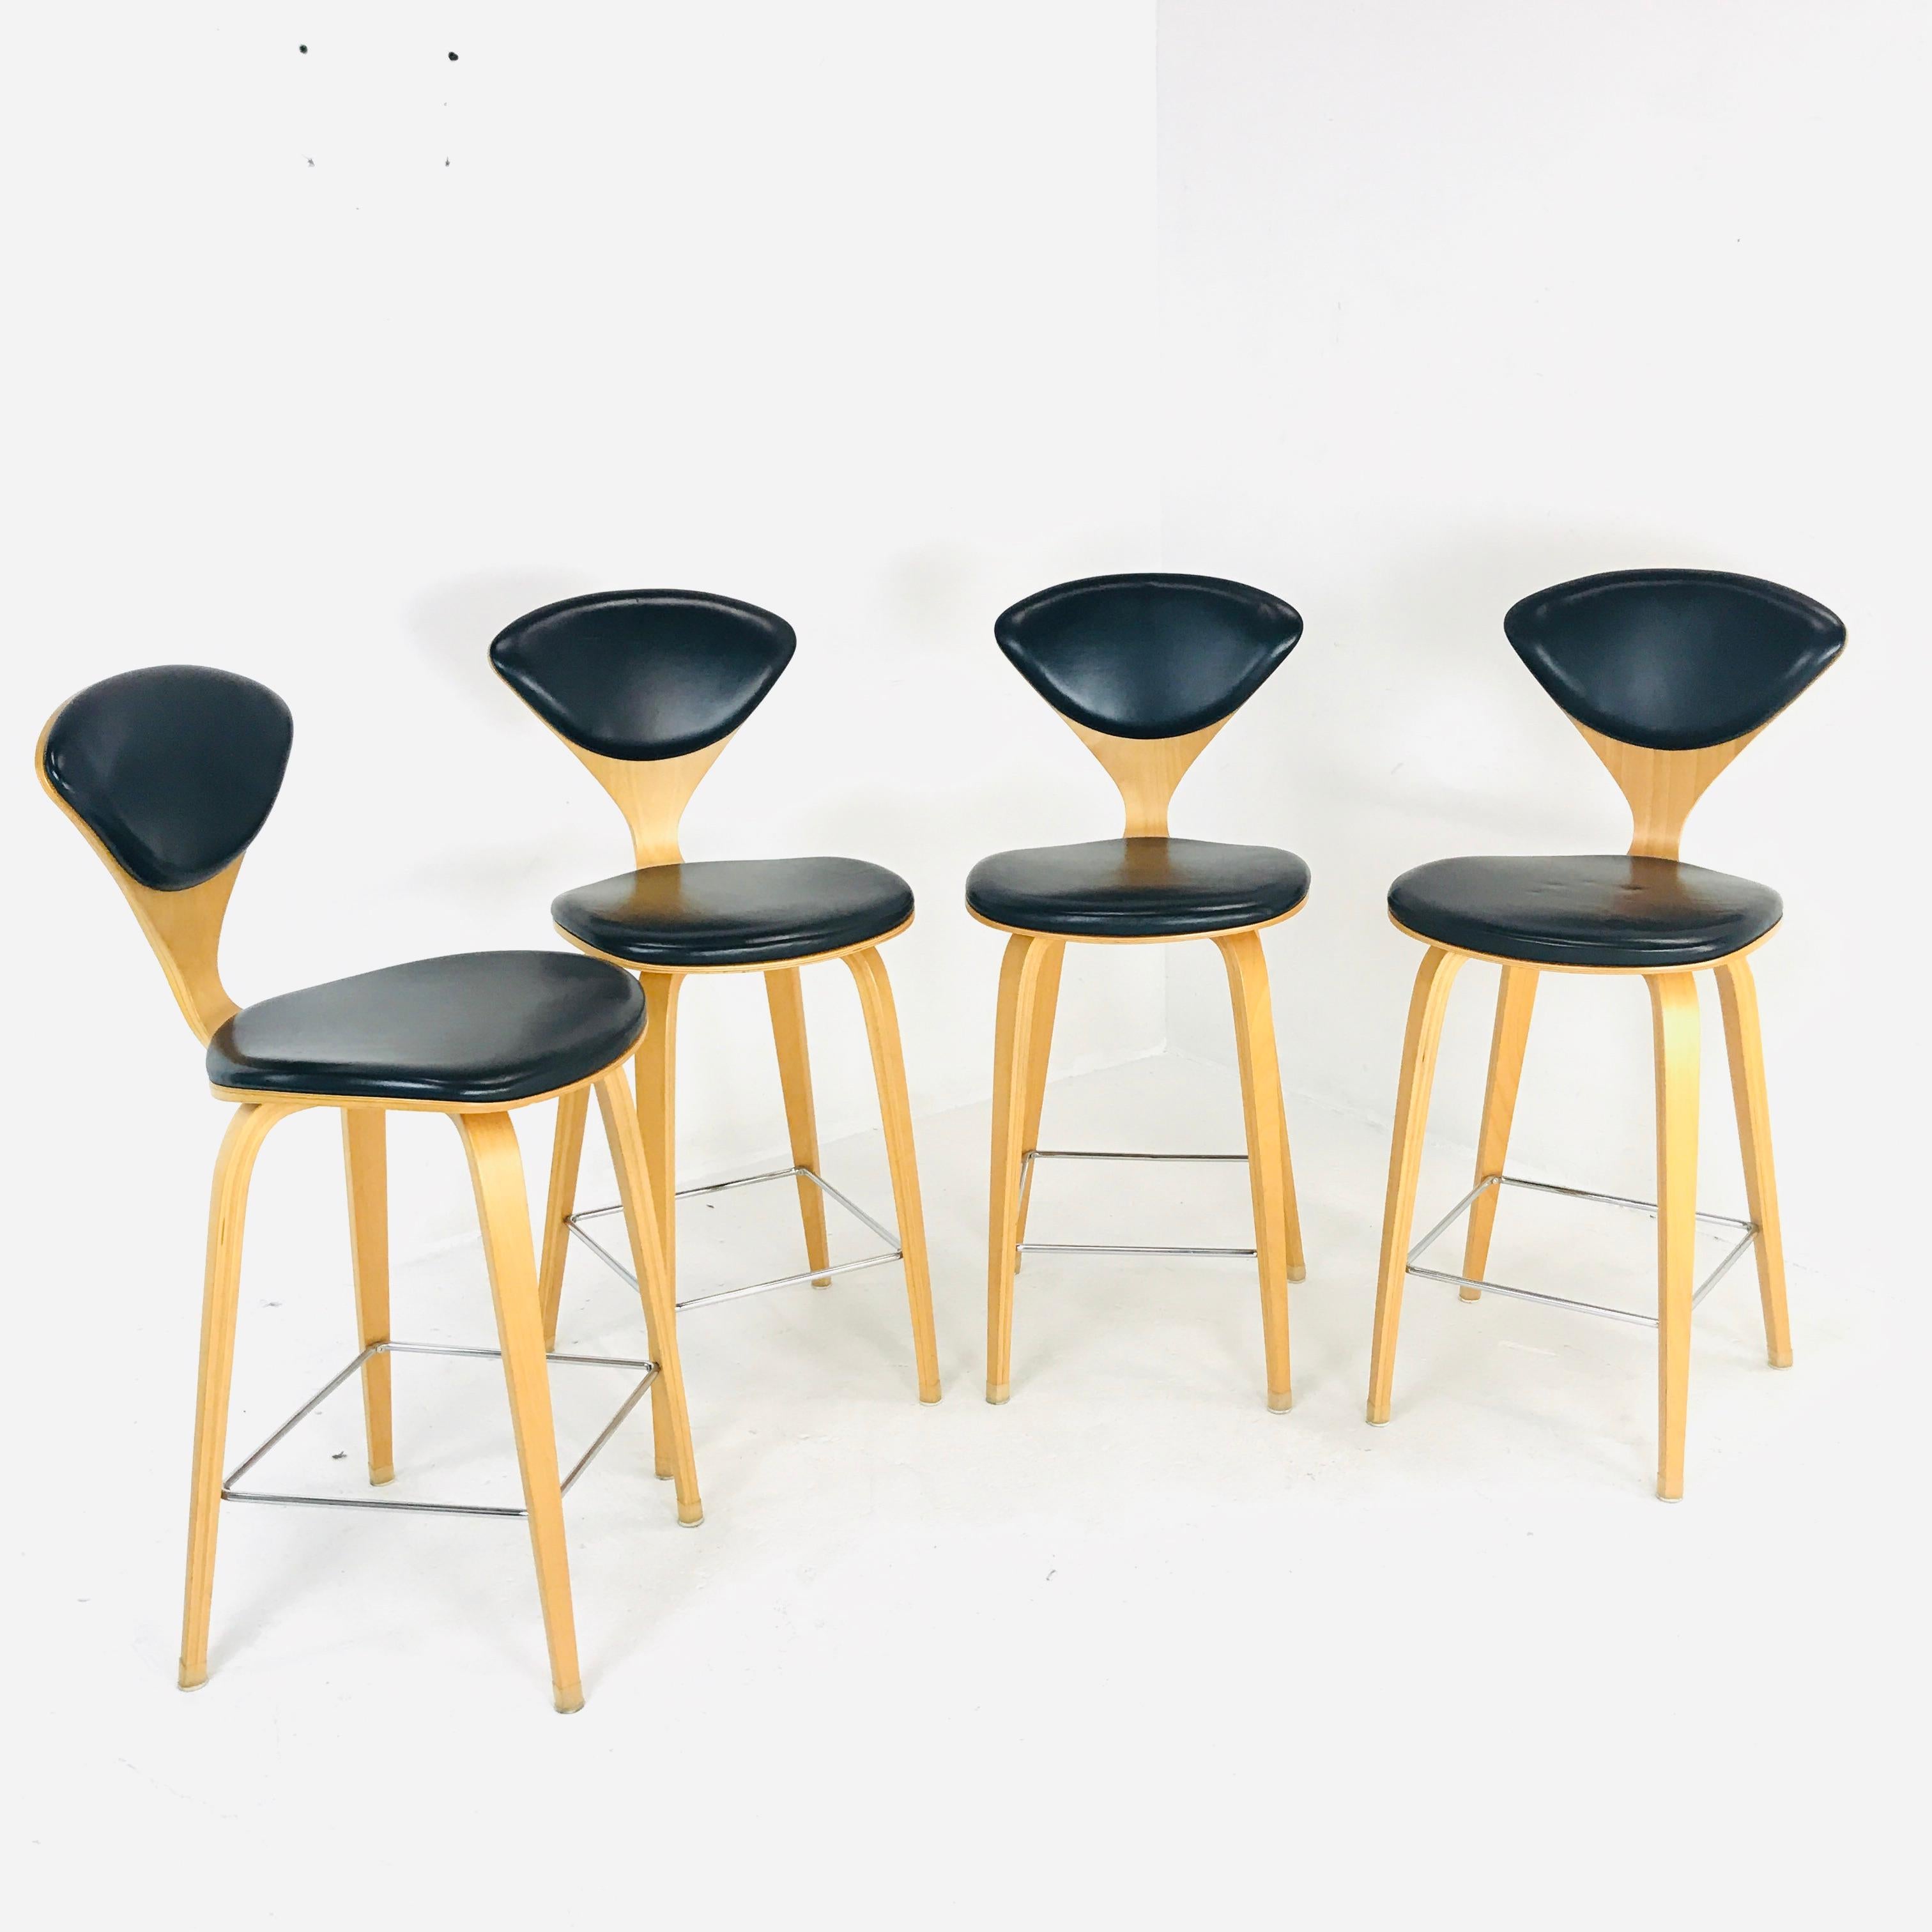 This upholstered stool by Cherner Chair Company is one piece that never goes unnoticed by your guests. The timeless design displays a molded triangular backrest and curved seat with a slim waist. It rests on brilliantly shaped, sharp-edged legs with